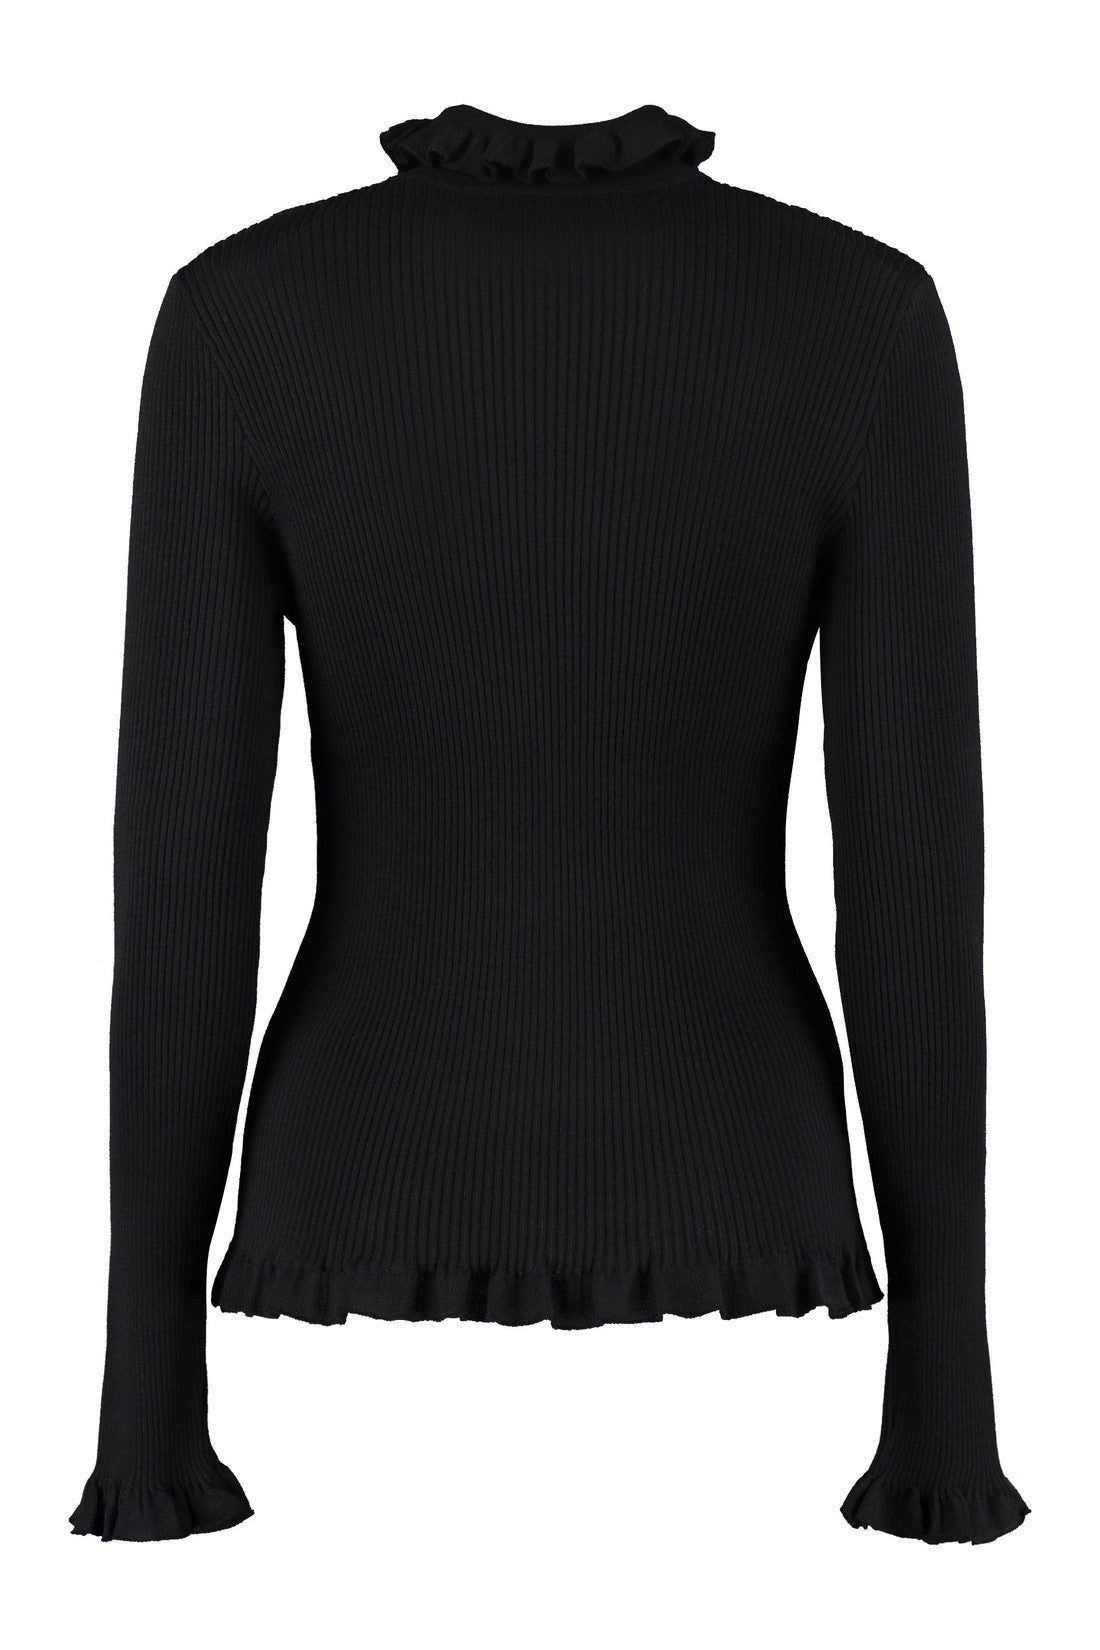 Boutique Moschino-OUTLET-SALE-Ribbed turtleneck sweater-ARCHIVIST